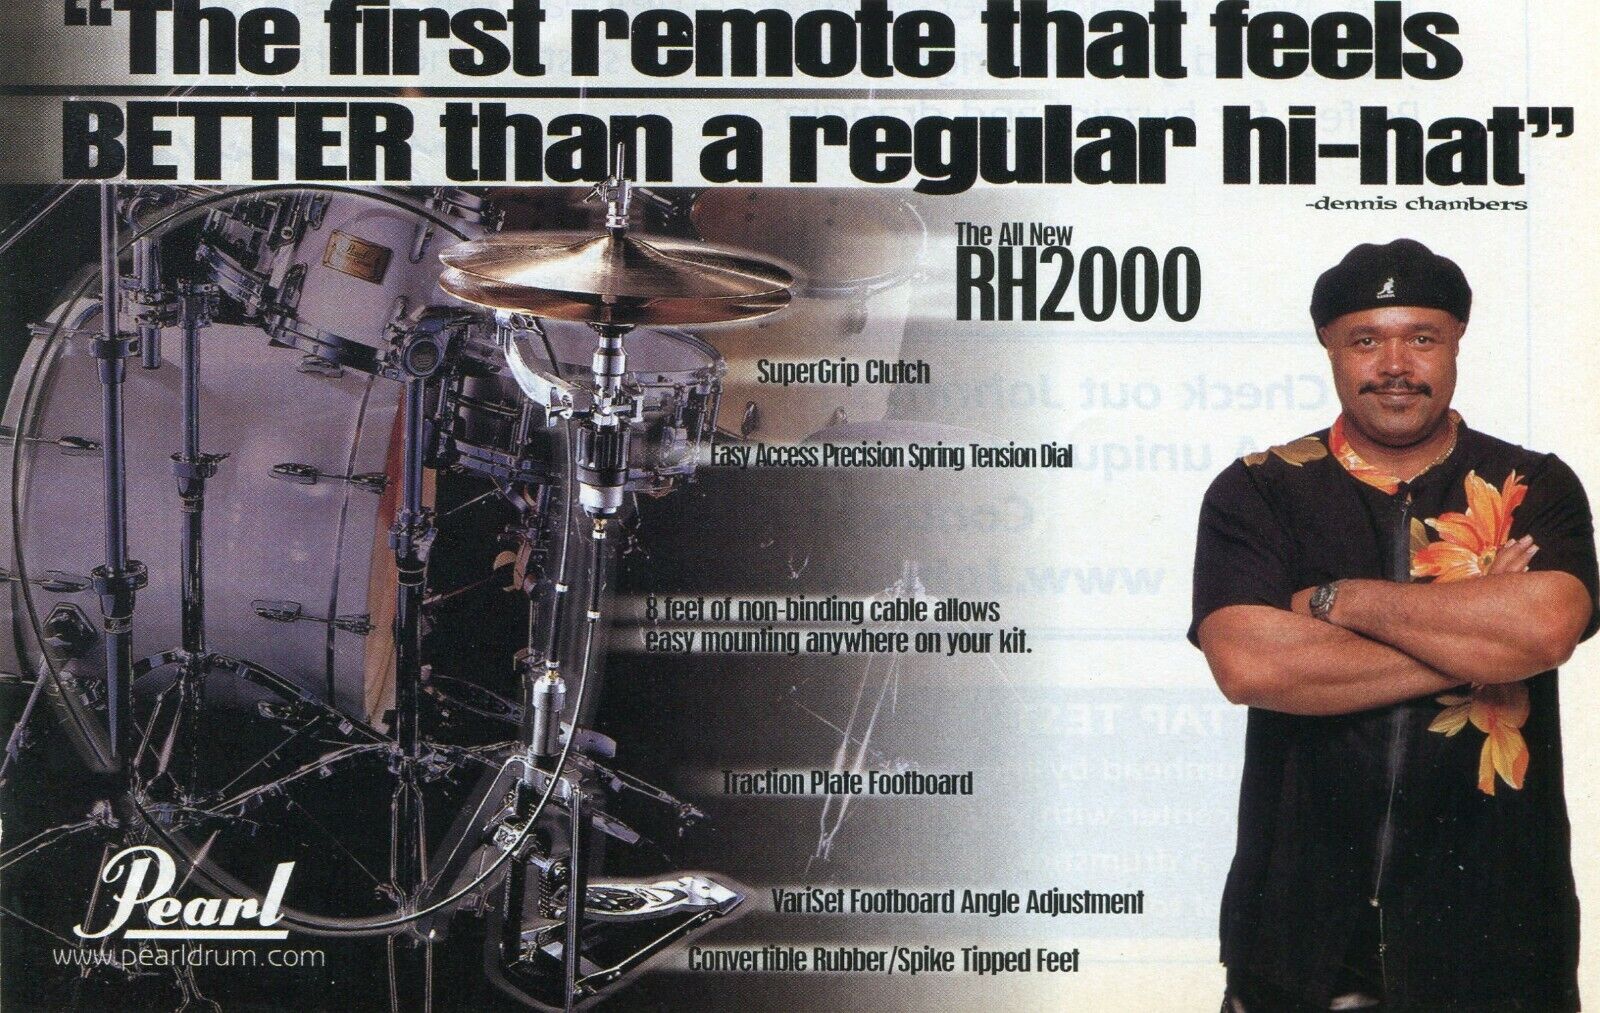 2002 small Print Ad of Pearl RH2000 Remote Hi-Hat Stand w Dennis Chambers